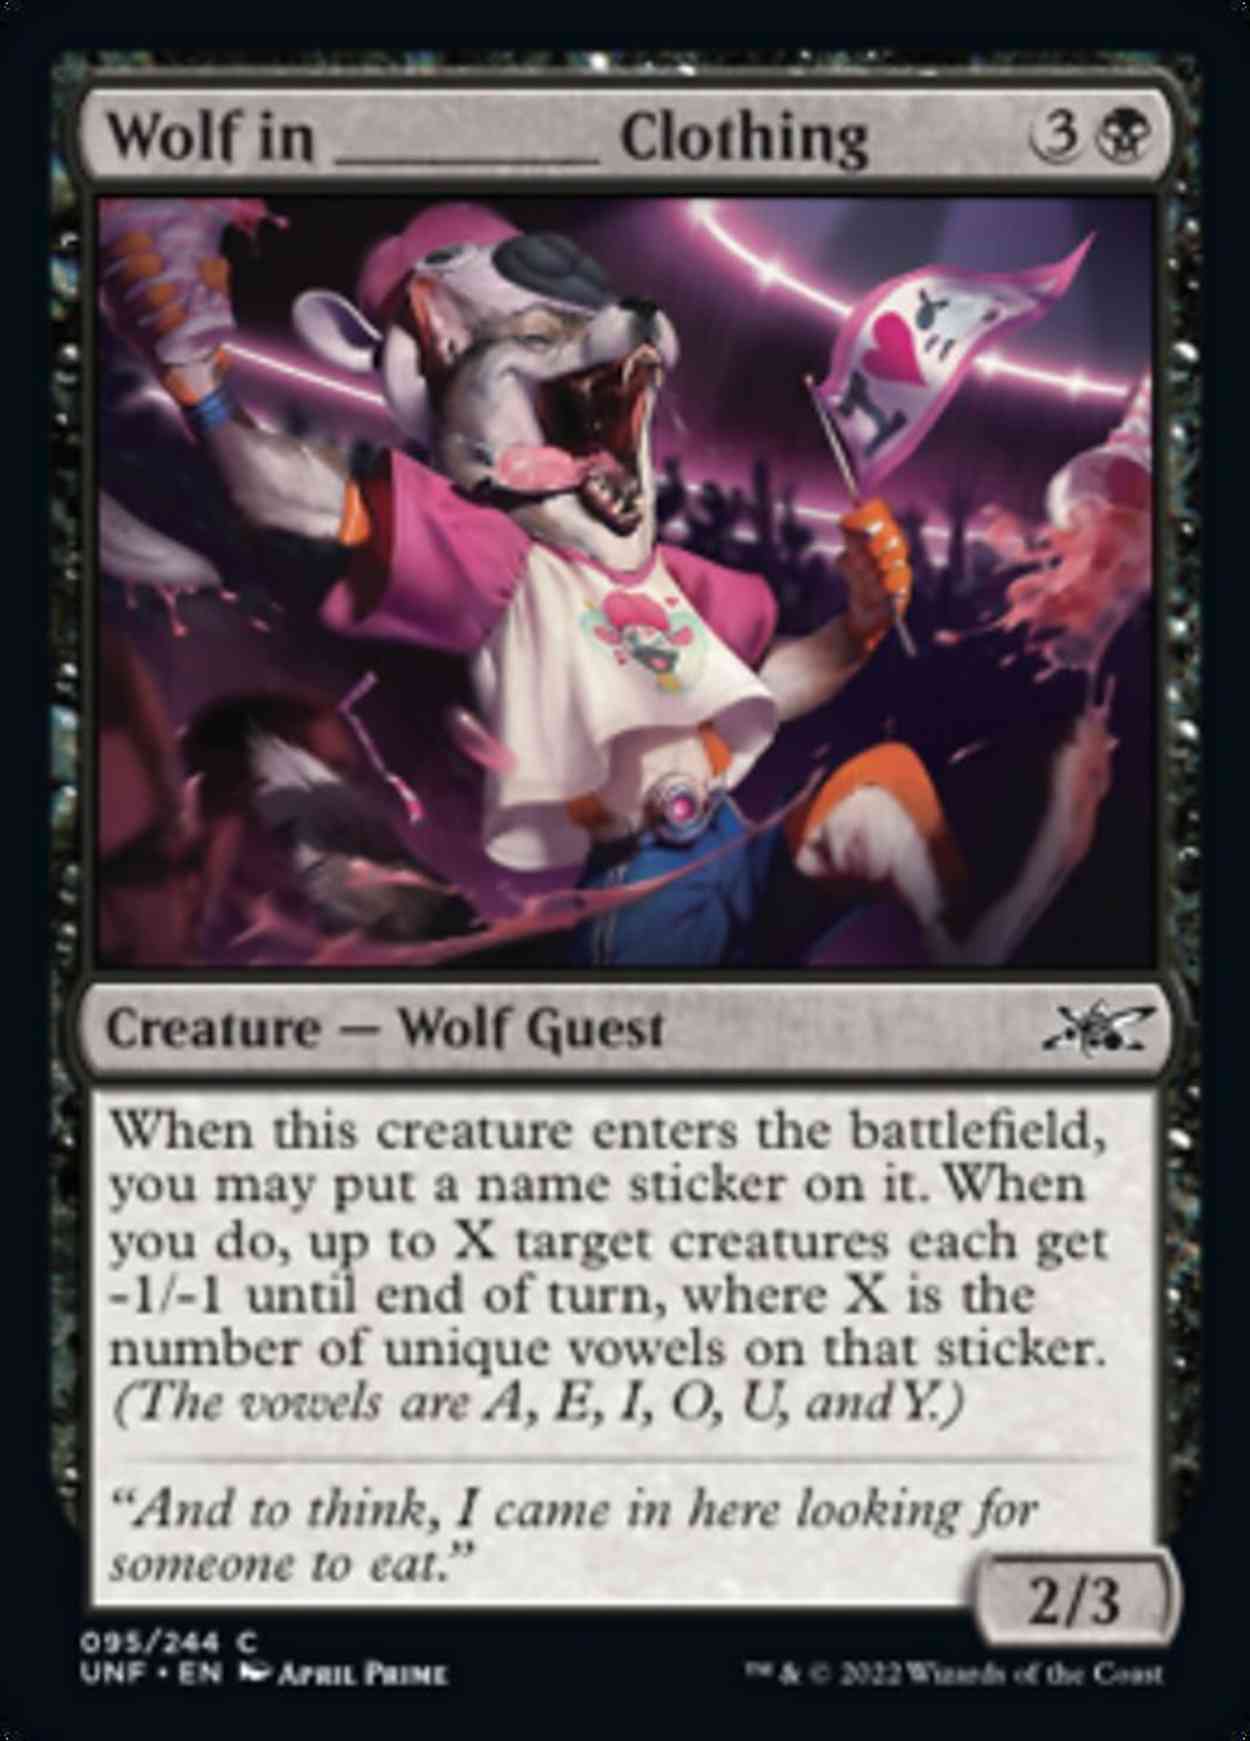 Wolf in _____ Clothing magic card front